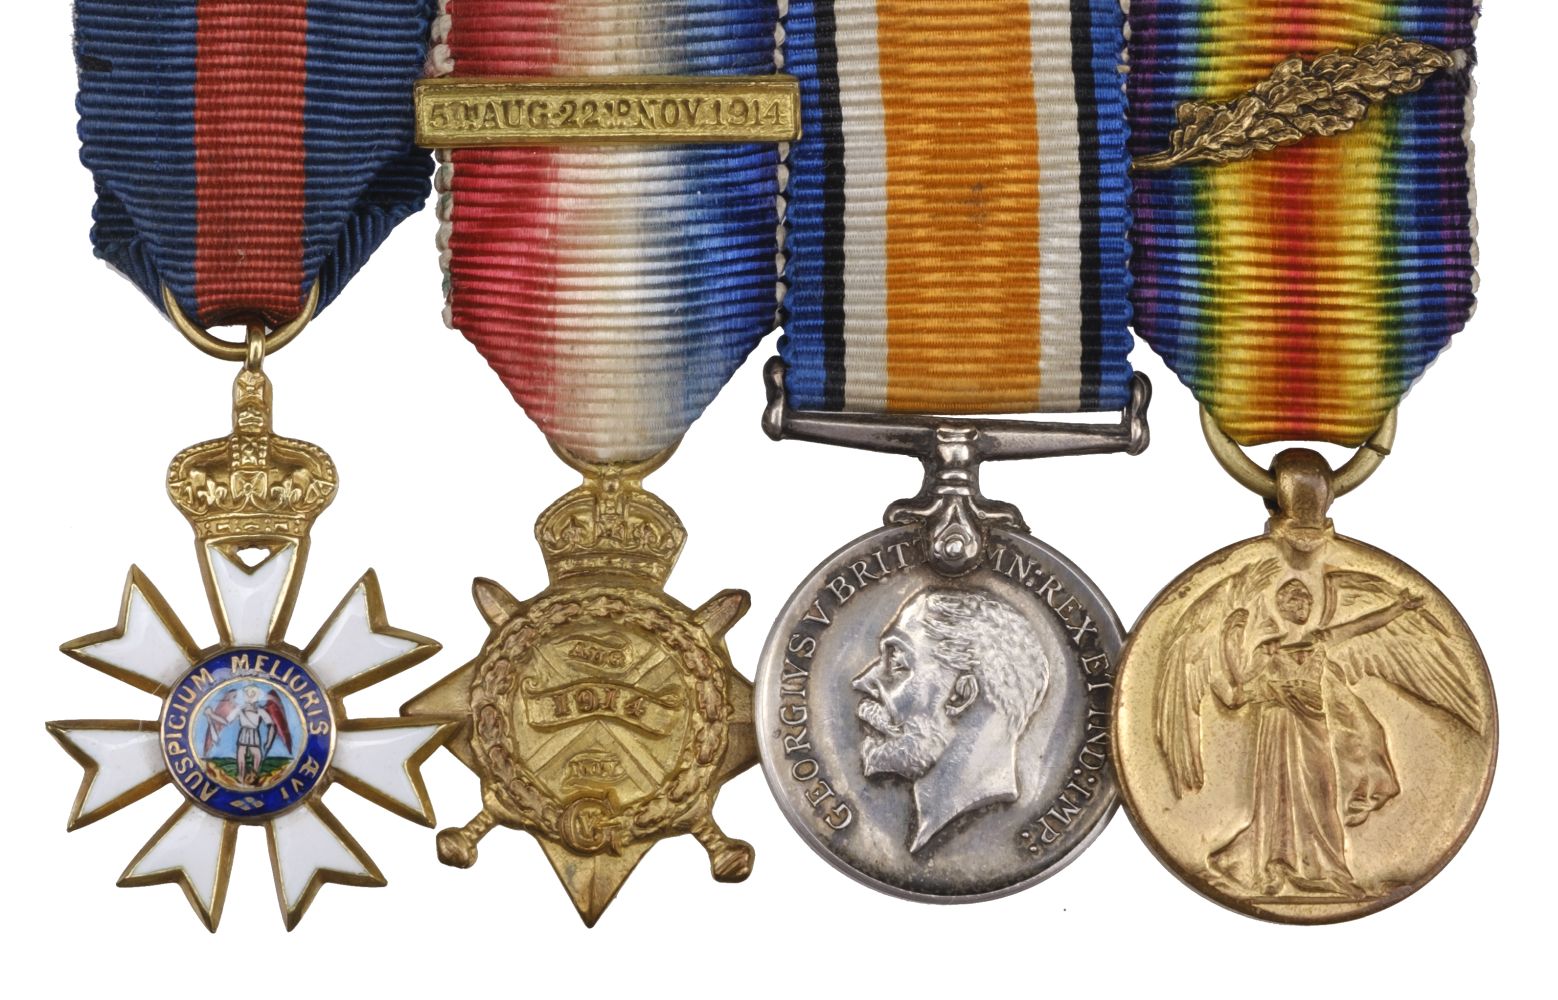 Miniature dress medals attributed to Reverend A.R. Yeoman, Deputy Chaplain General